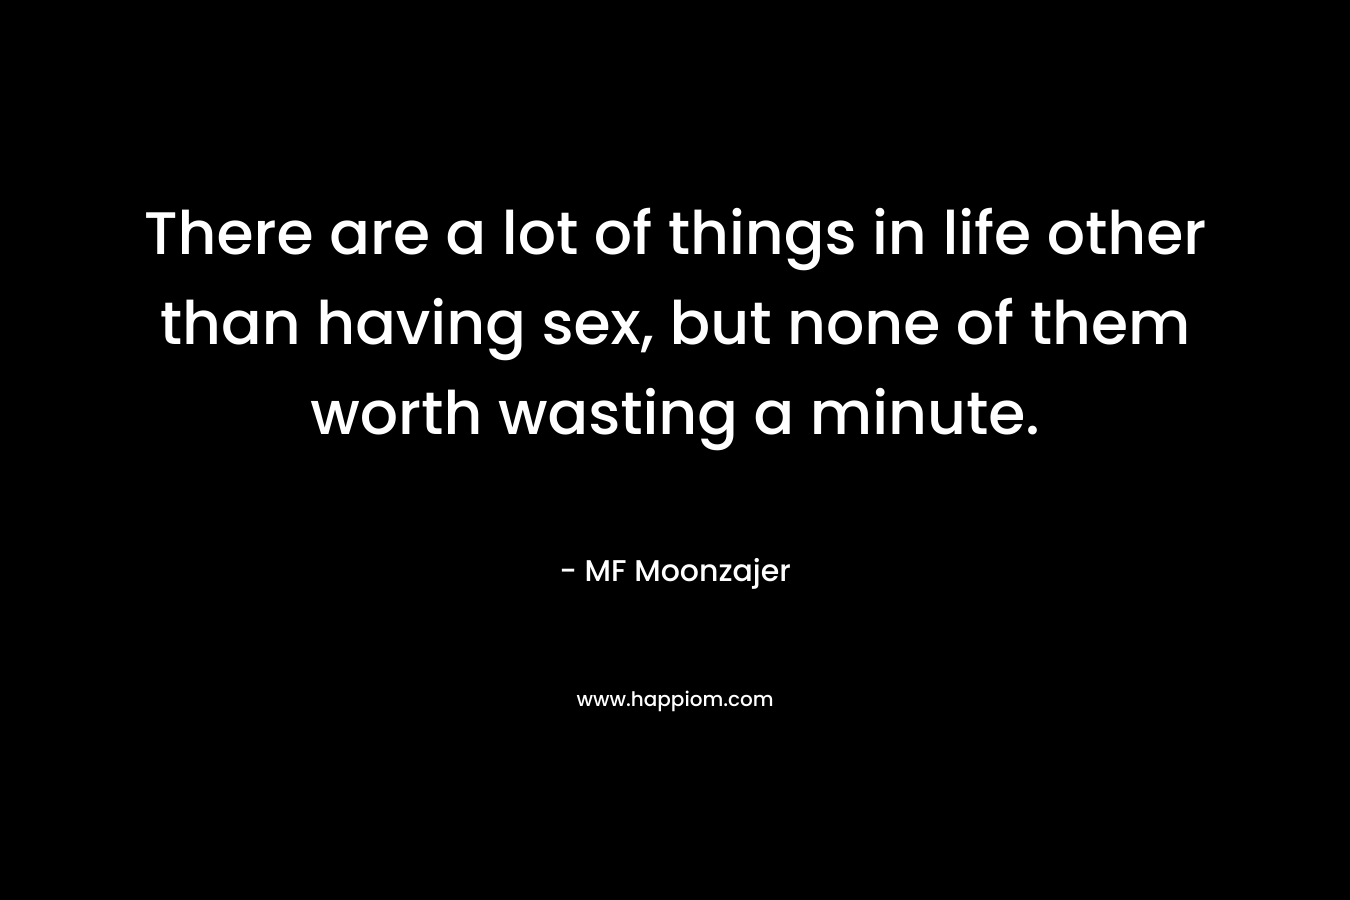 There are a lot of things in life other than having sex, but none of them worth wasting a minute.